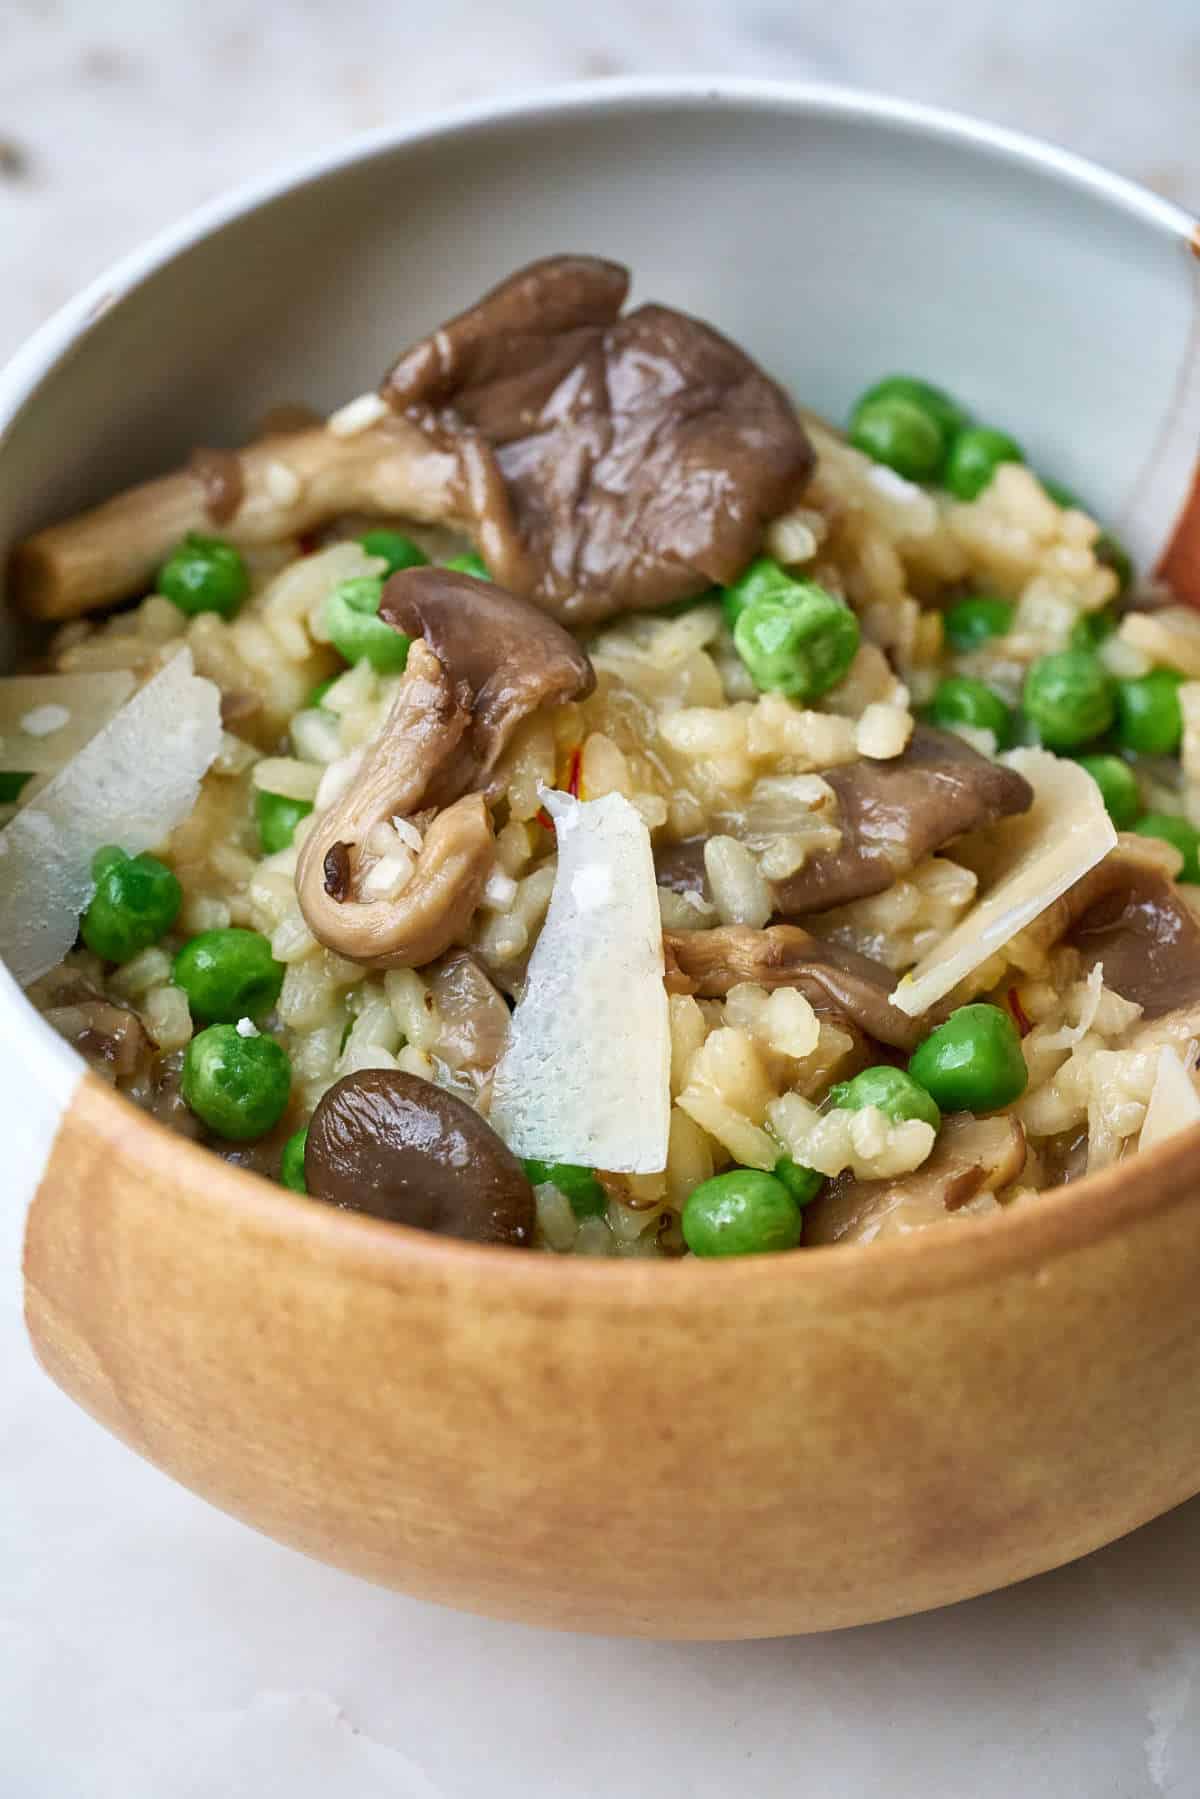 Risotto with mushrooms in a bowl.